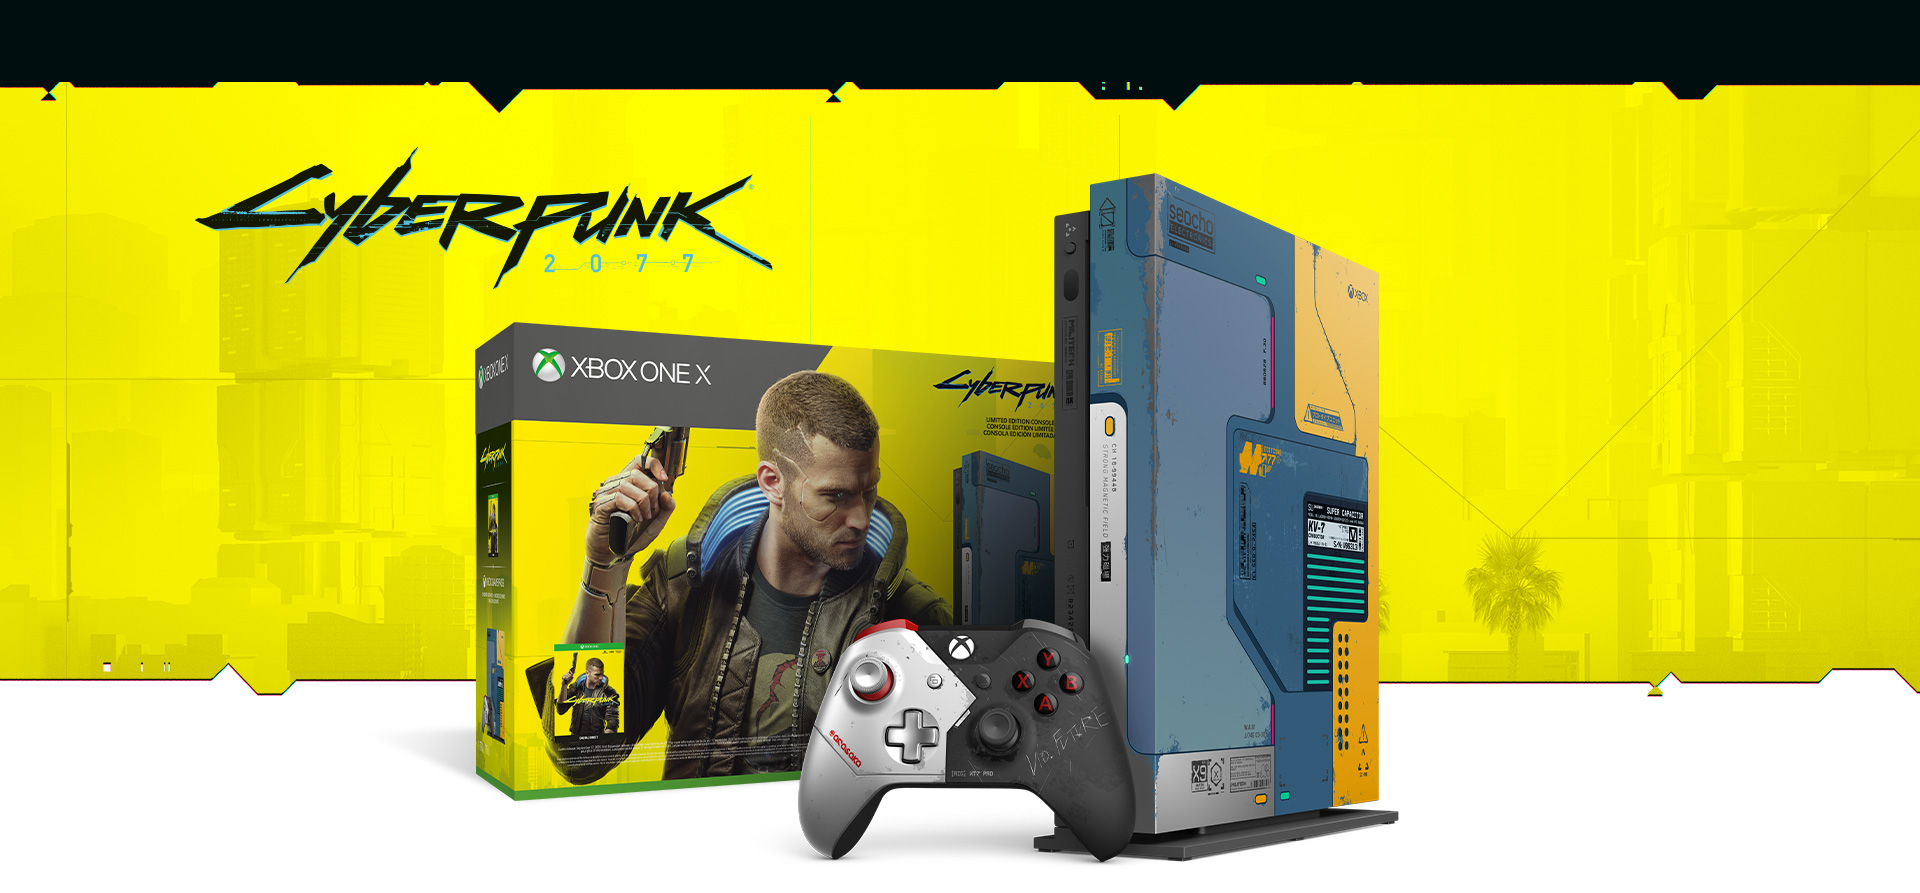 Xbox One X console in front of a hardware bundle box featuring Cyberpunk 2077 art